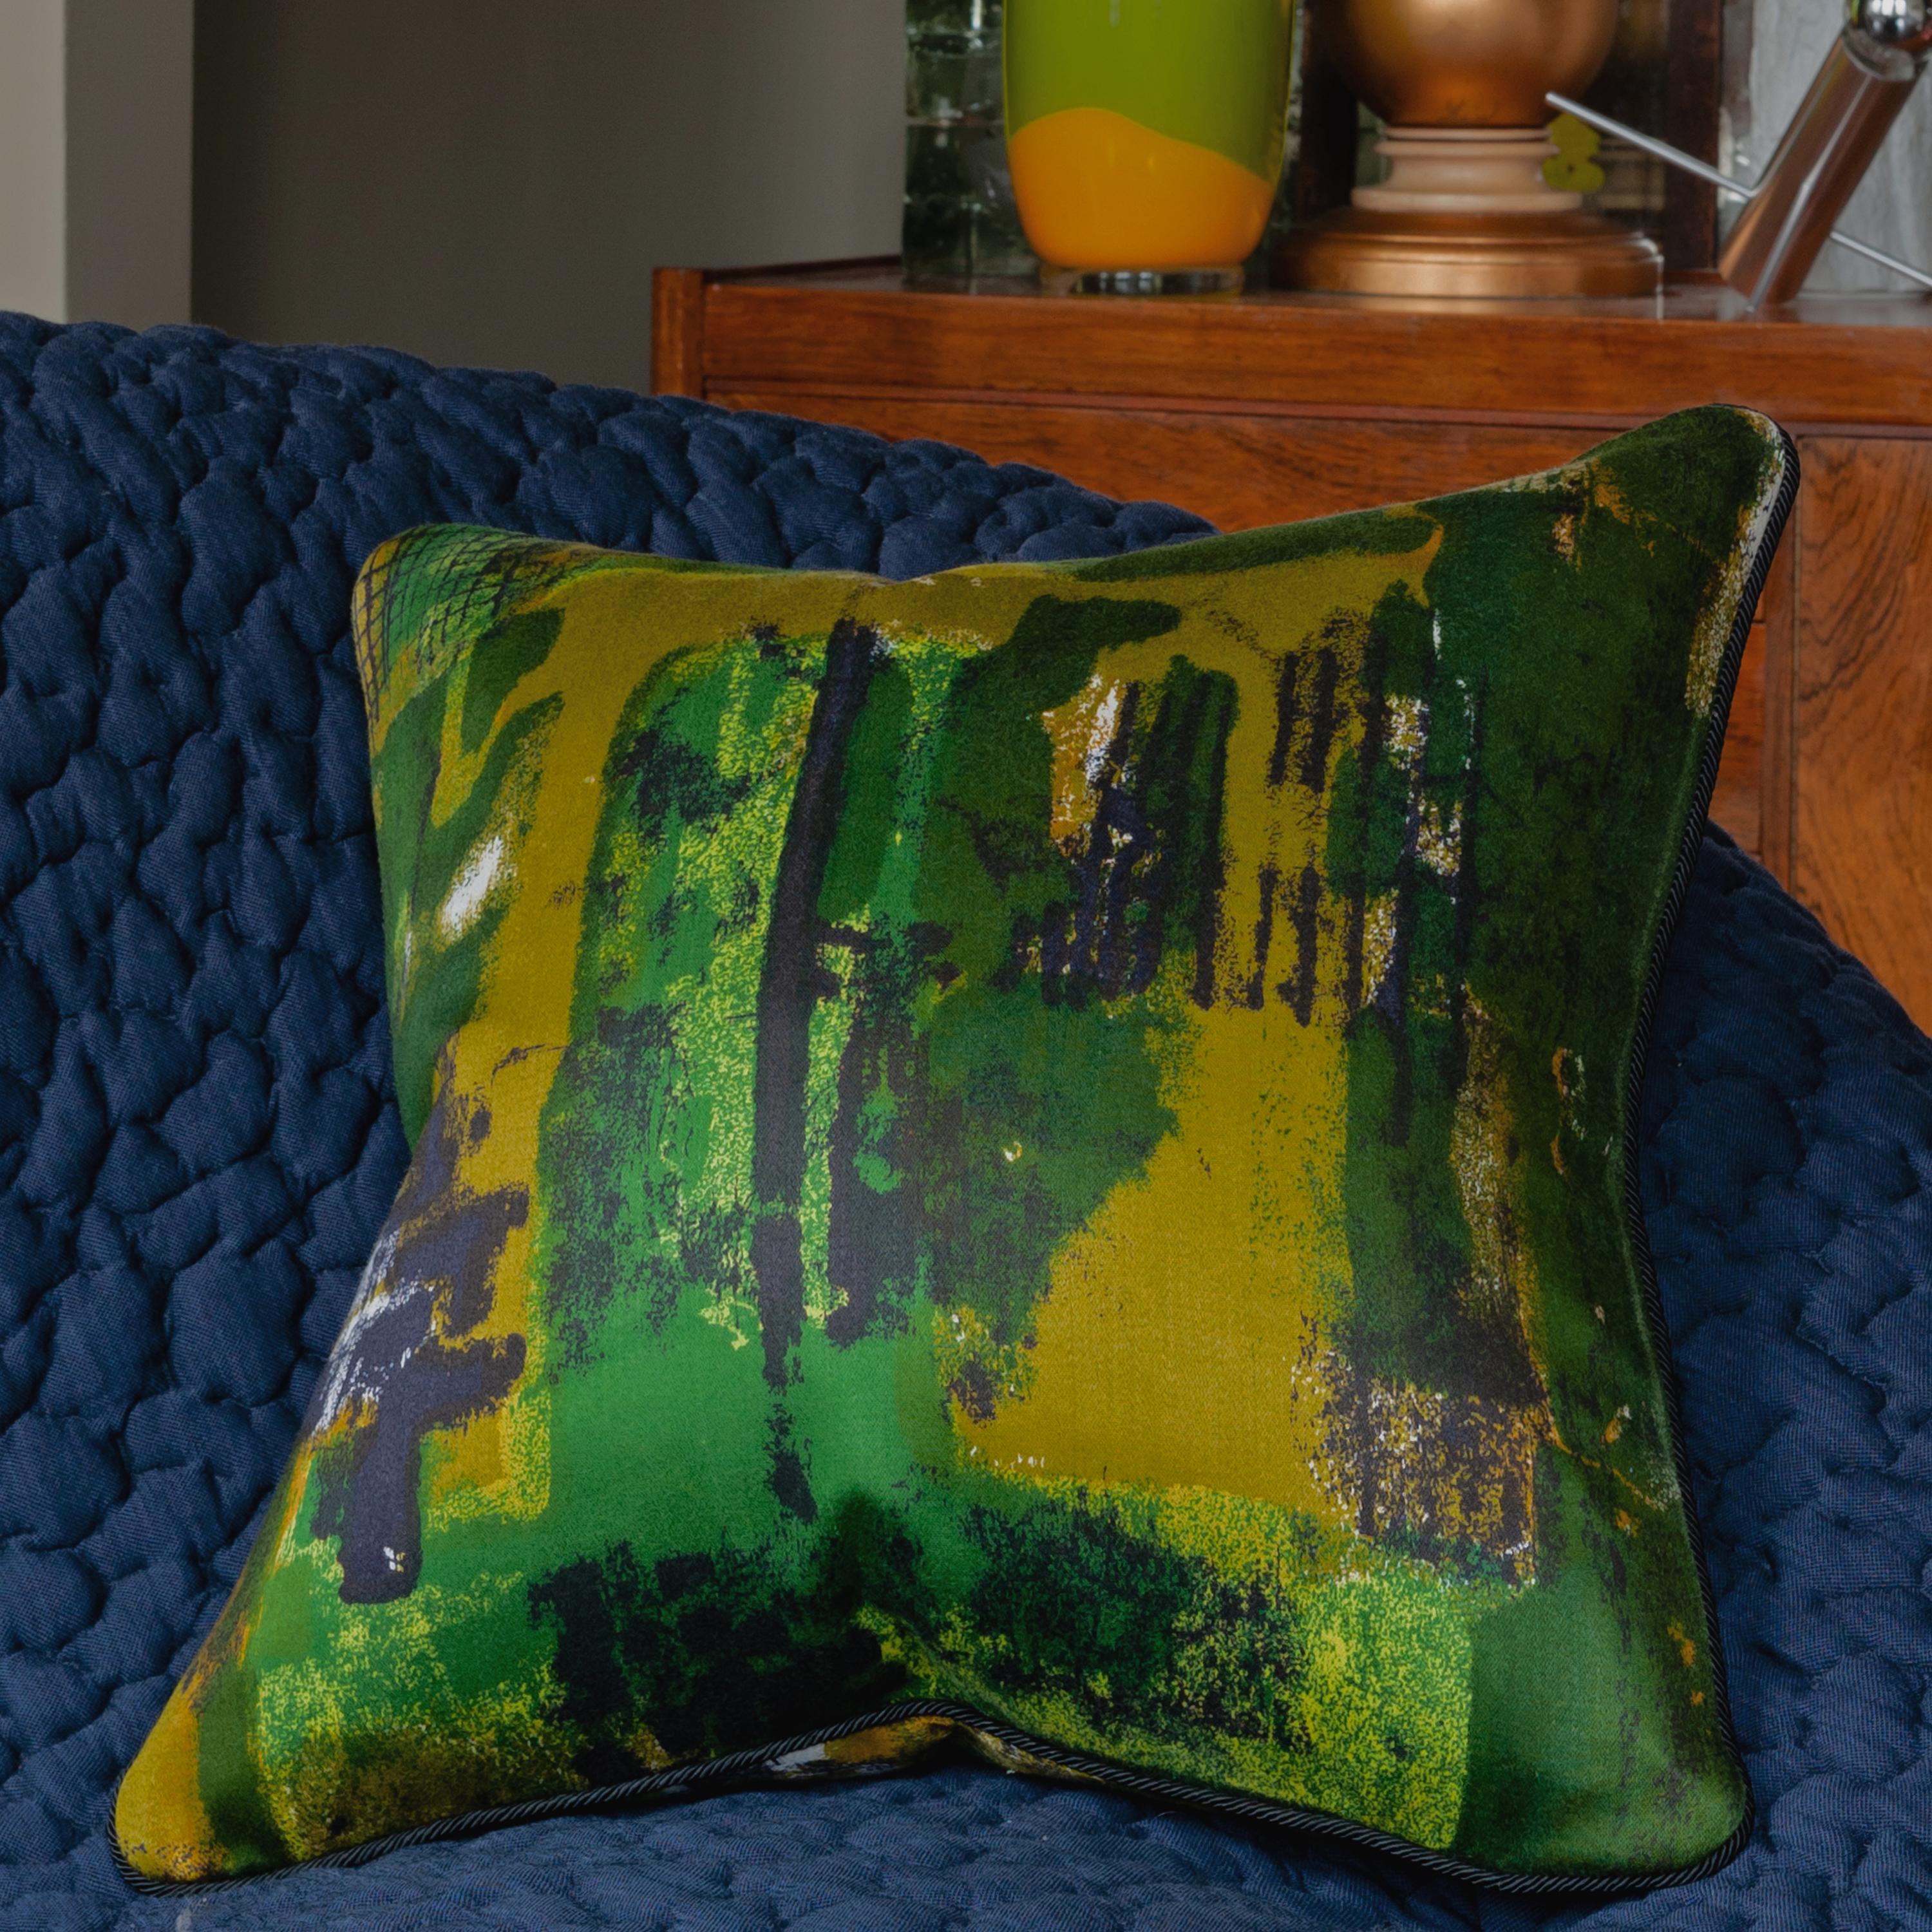 'Rhapsody',
circa 1950
British bespoke luxury cushion created using original mid-century cotton furnishing fabric. The selvedge details ‘A Francis’ Screen print. Printed in VAT Colors, the richness of colors is an excellent example of the rich green